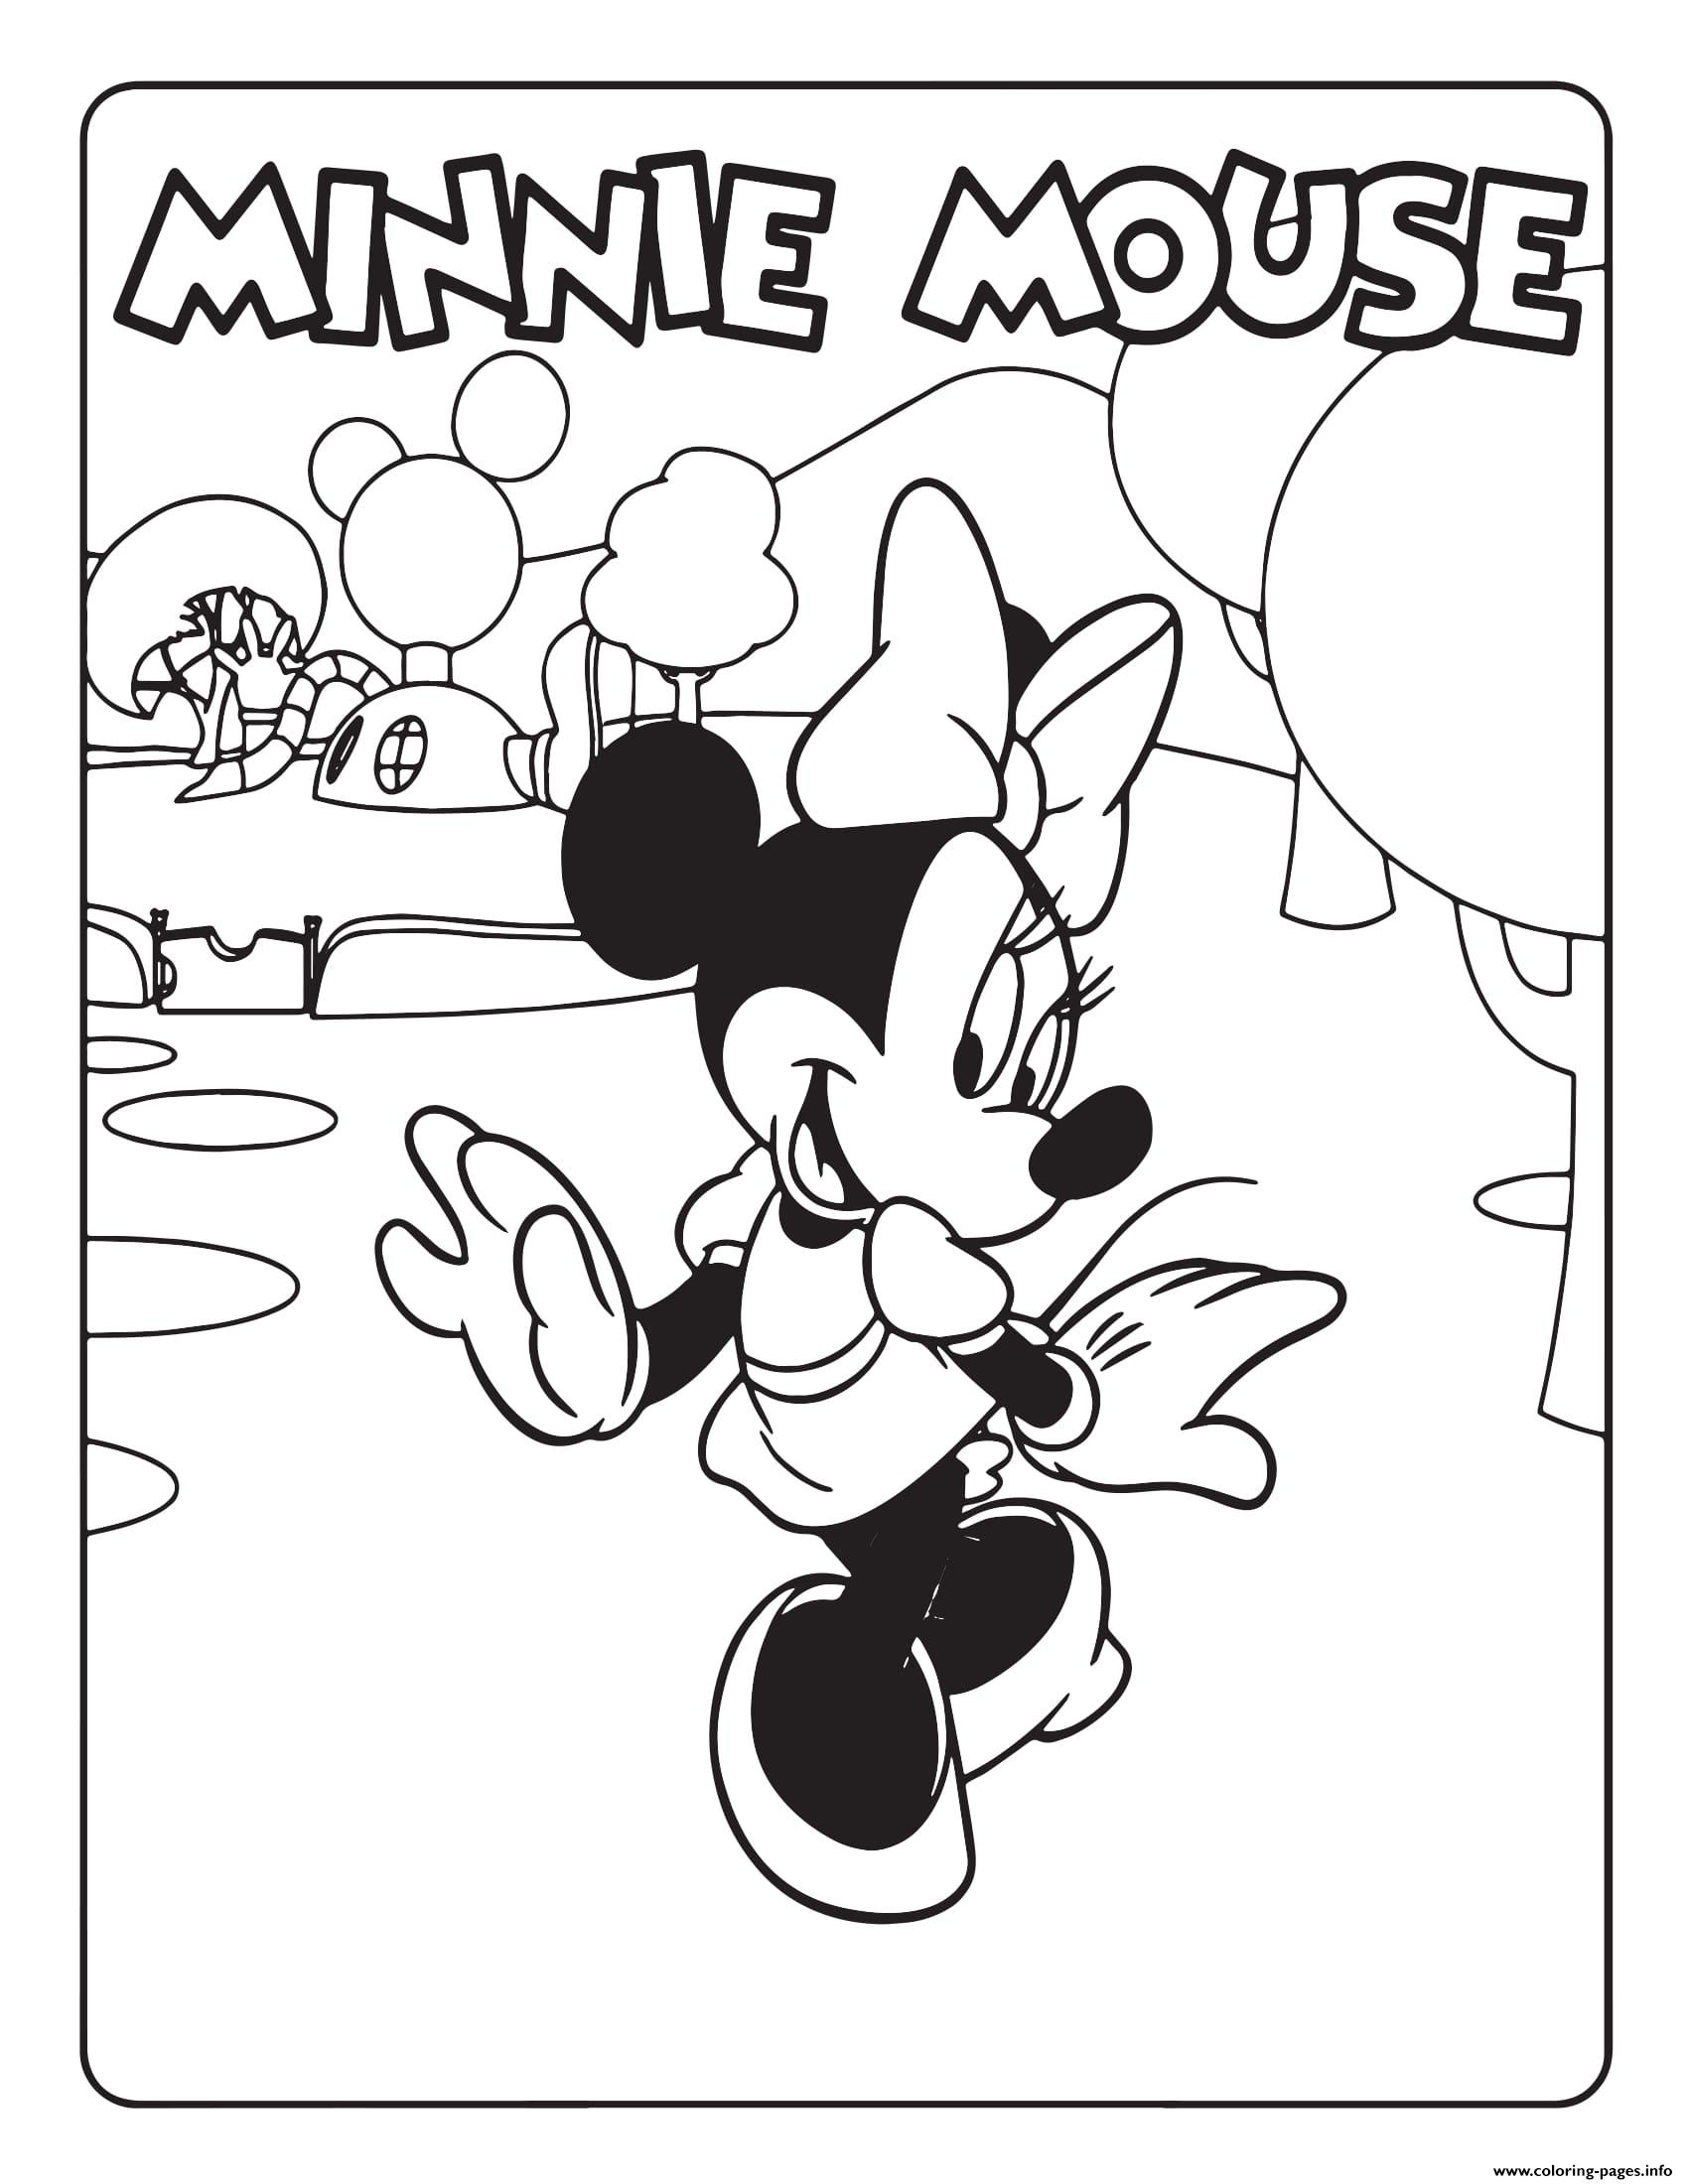 Minnie Mouse coloring